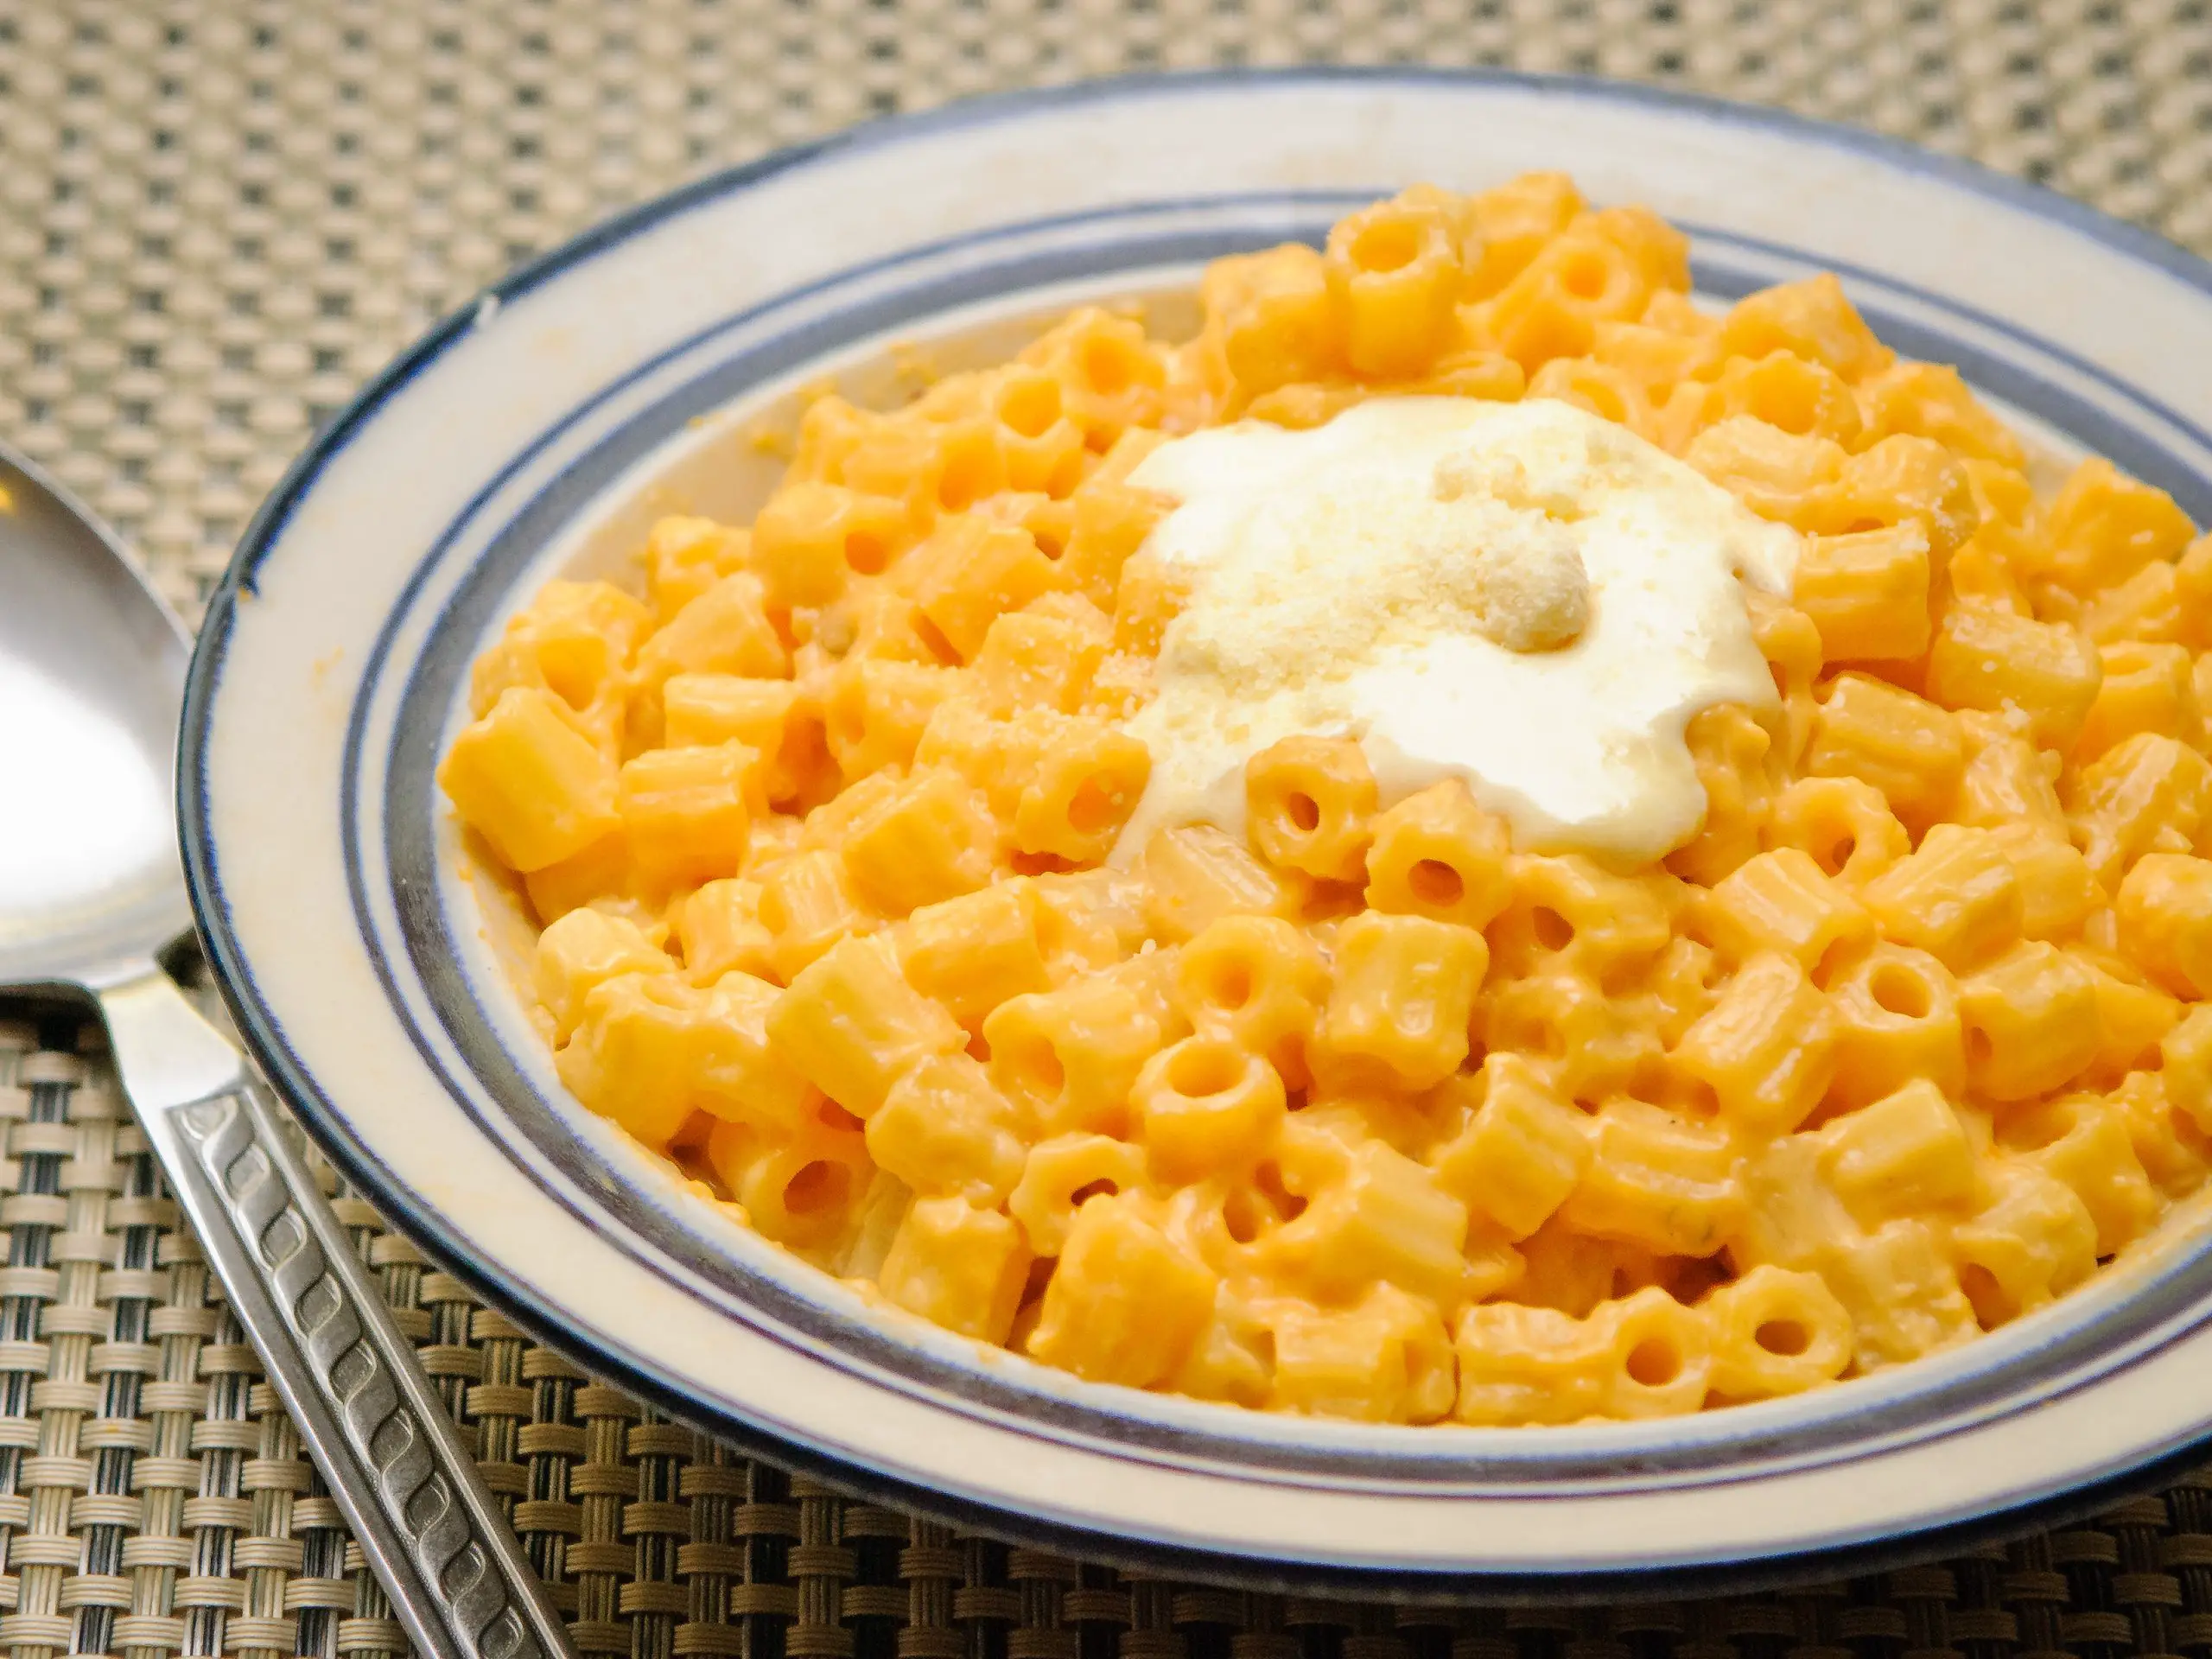 How to Make Extra Cheesy Macaroni and Cheese: 10 Steps